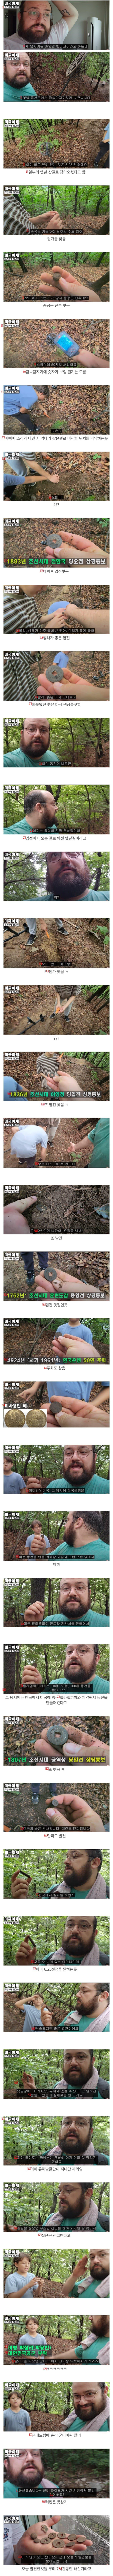 a metal detector used on a hiking trail